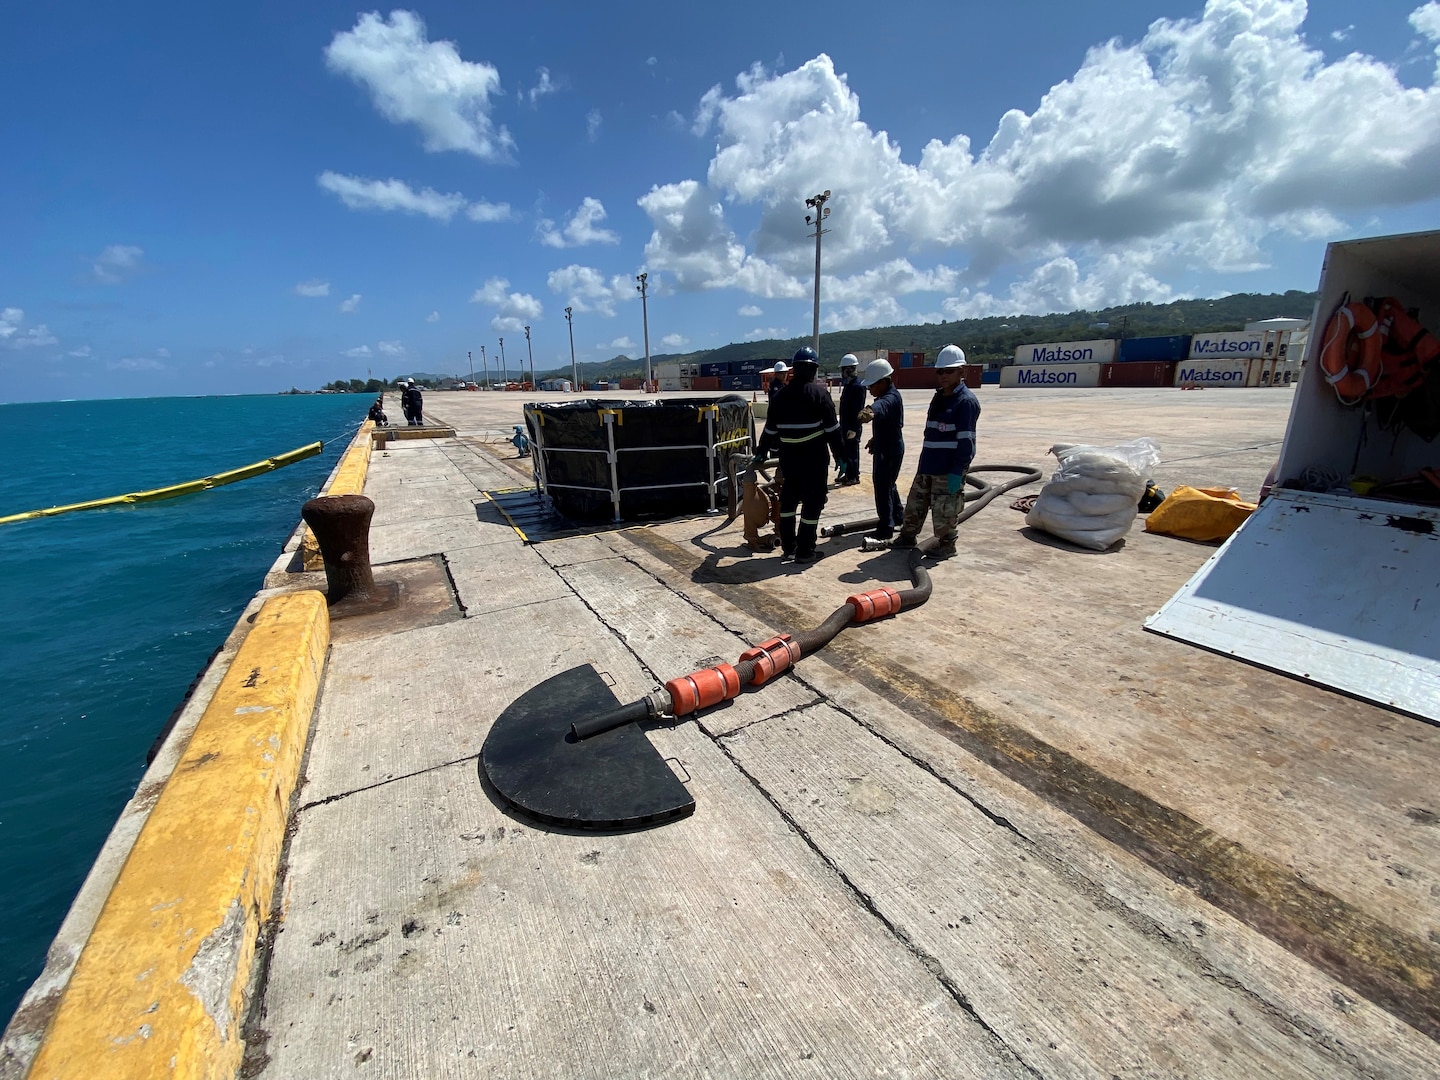 U.S. Coast Guard members observe a skimmer being set up during a Government-Initiated Unannounced Exercise (GIUE) at Mobil Saipan on Feb. 29, 2024, in Saipan, Commonwealth of the Northern Mariana Islands. The primary goal of a GIUE is to ensure that the plan holder can effectively implement their response plan during a marine environmental response scenario. (U.S. Coast Guard photo by Lt. Justin Miller)